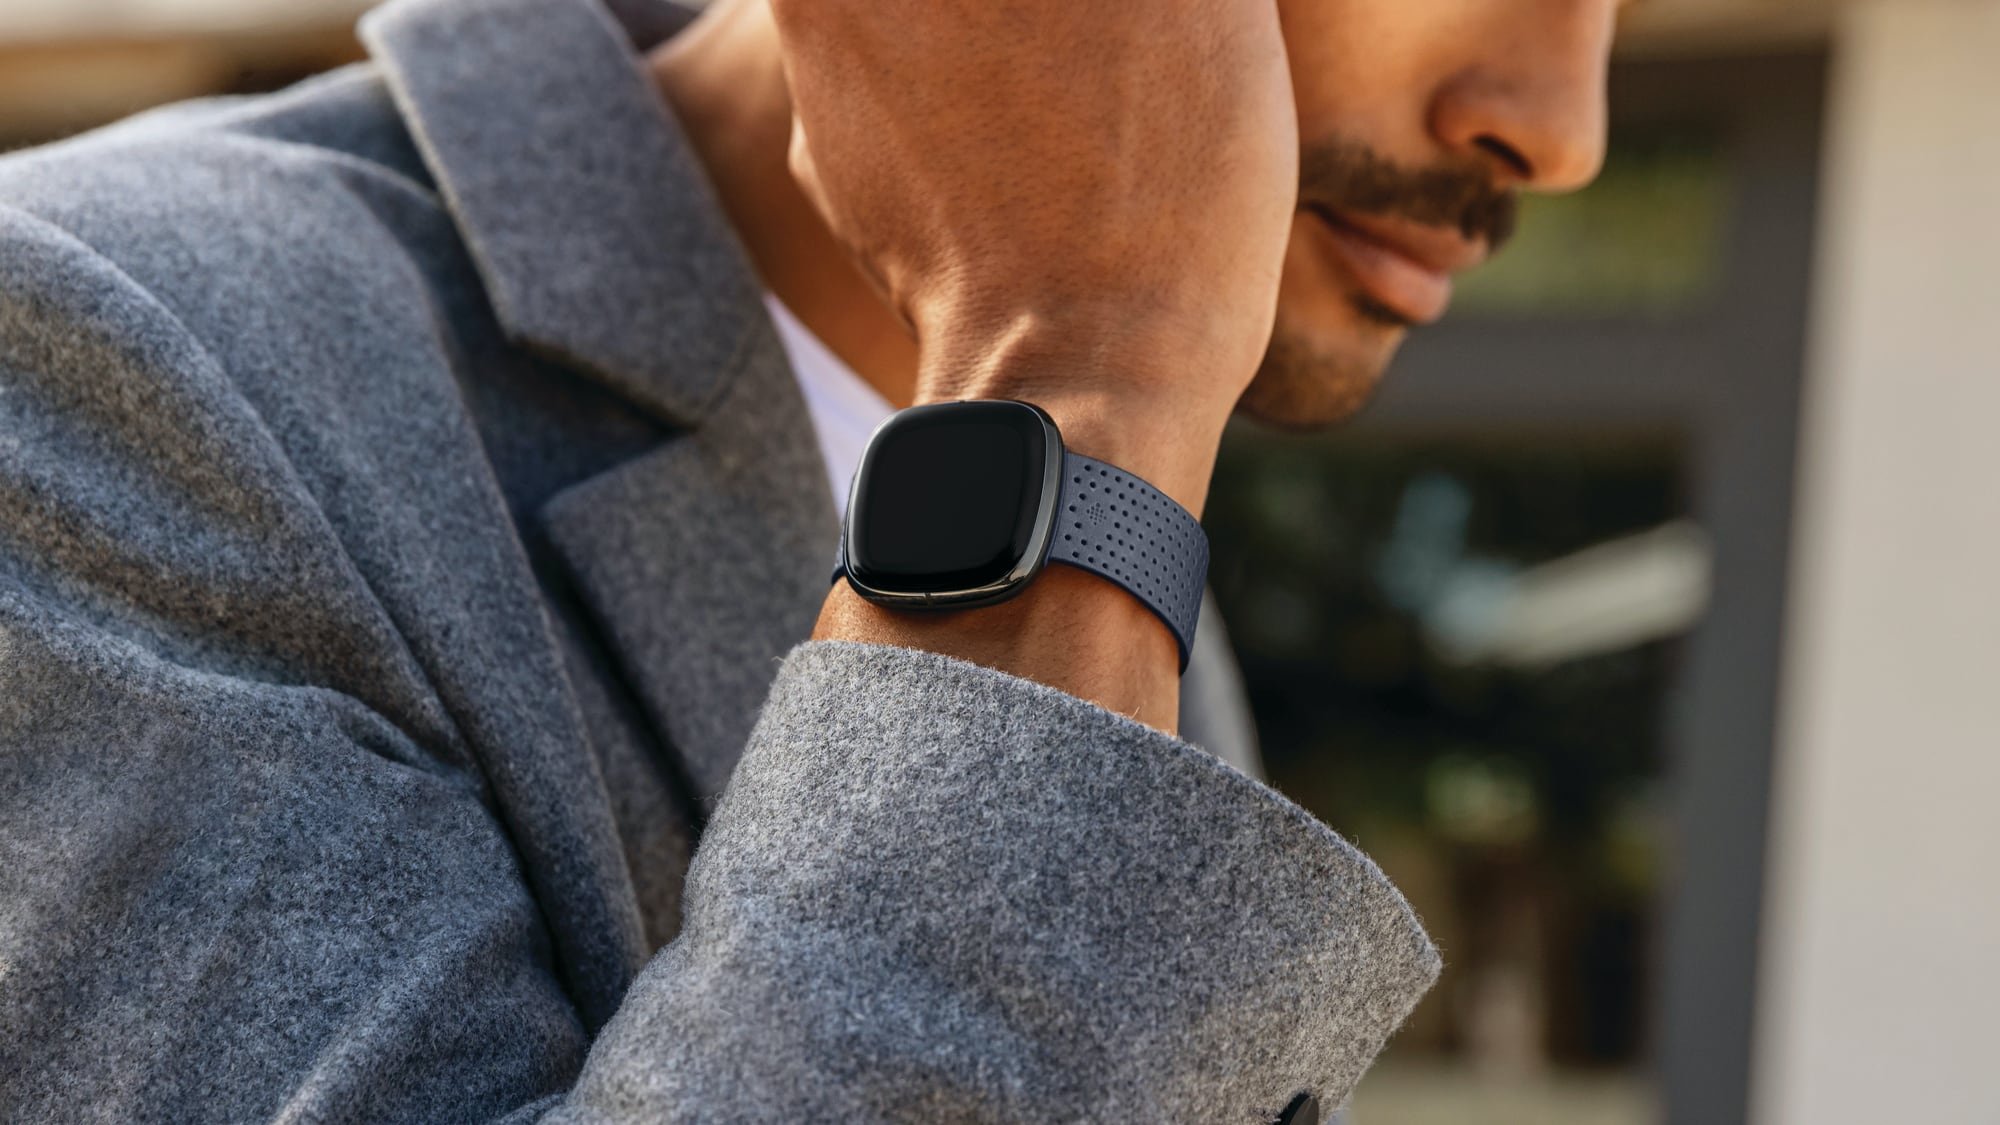 Fitbit Sense advanced health smartwatch monitors your heart, stress, and health